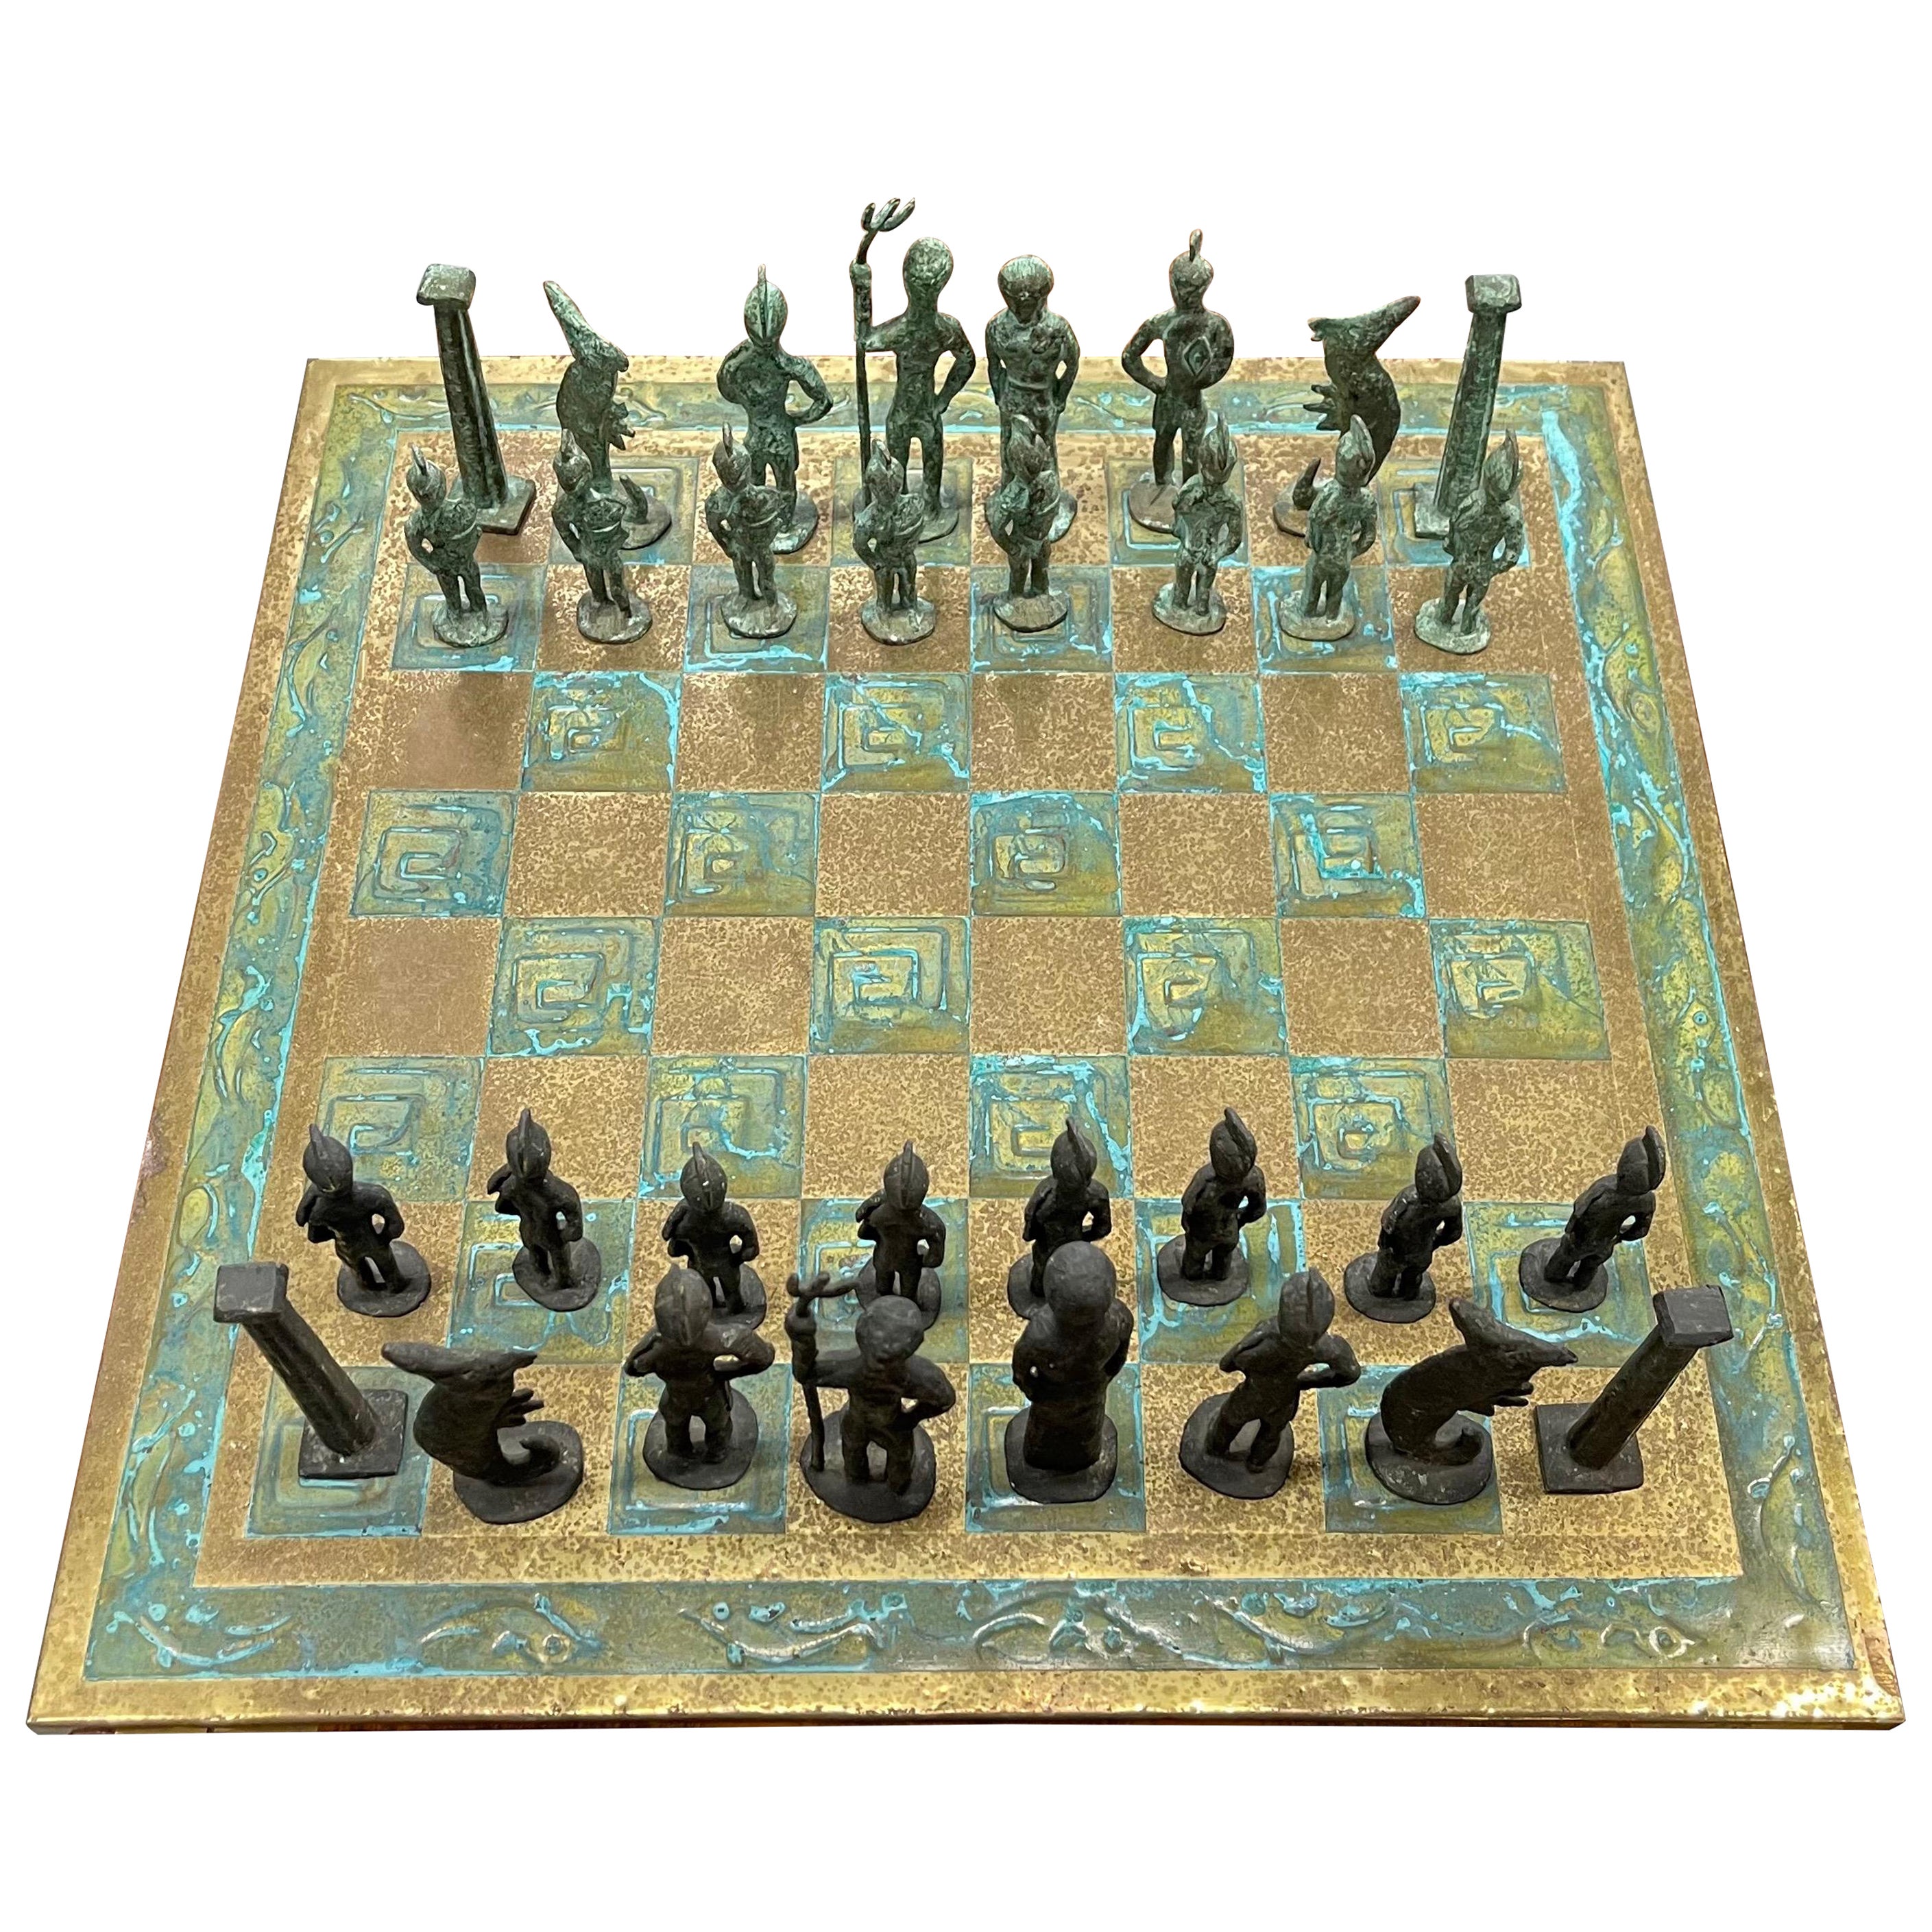 VTG Chess Set with typical spanish pieces of Bronze figures Metal without board 